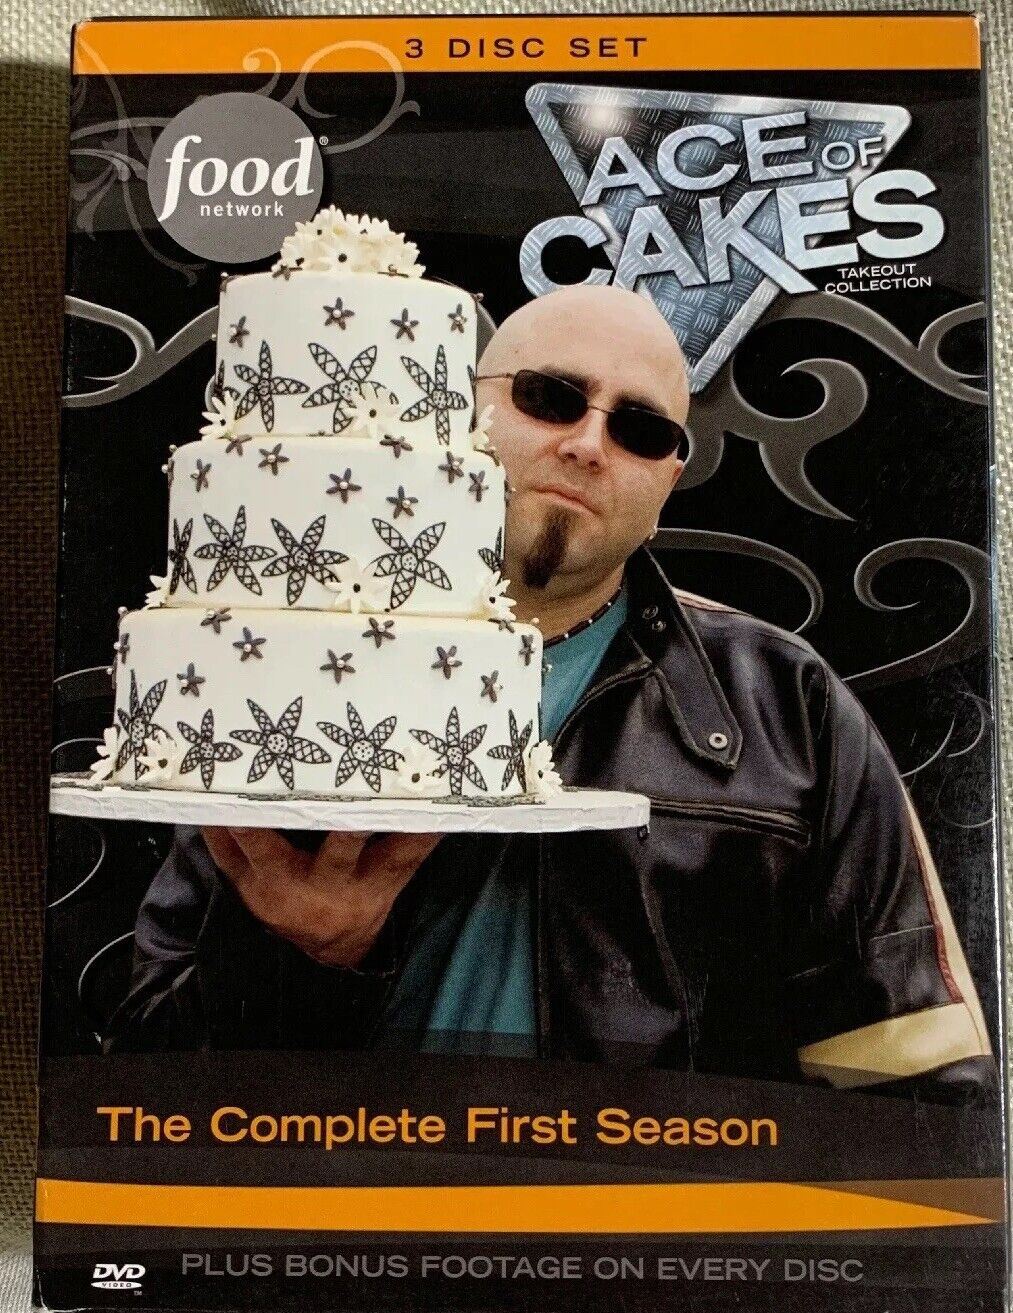 Ace of Cakes The Complete First Season from Food Network (DVD)